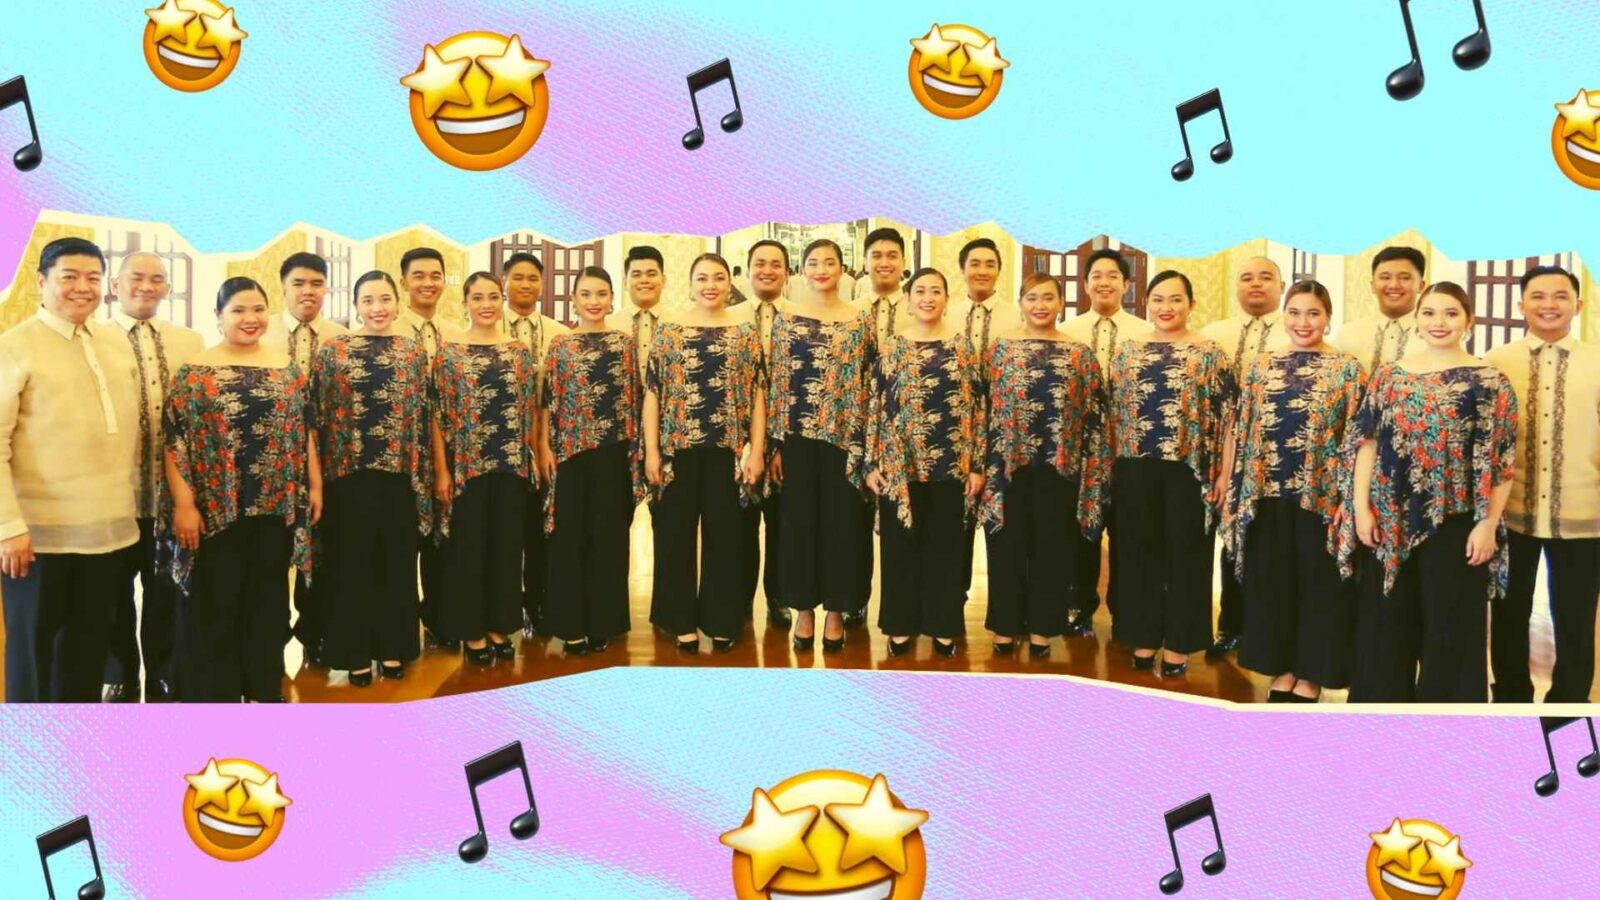 The Philippine Madrigal Singers